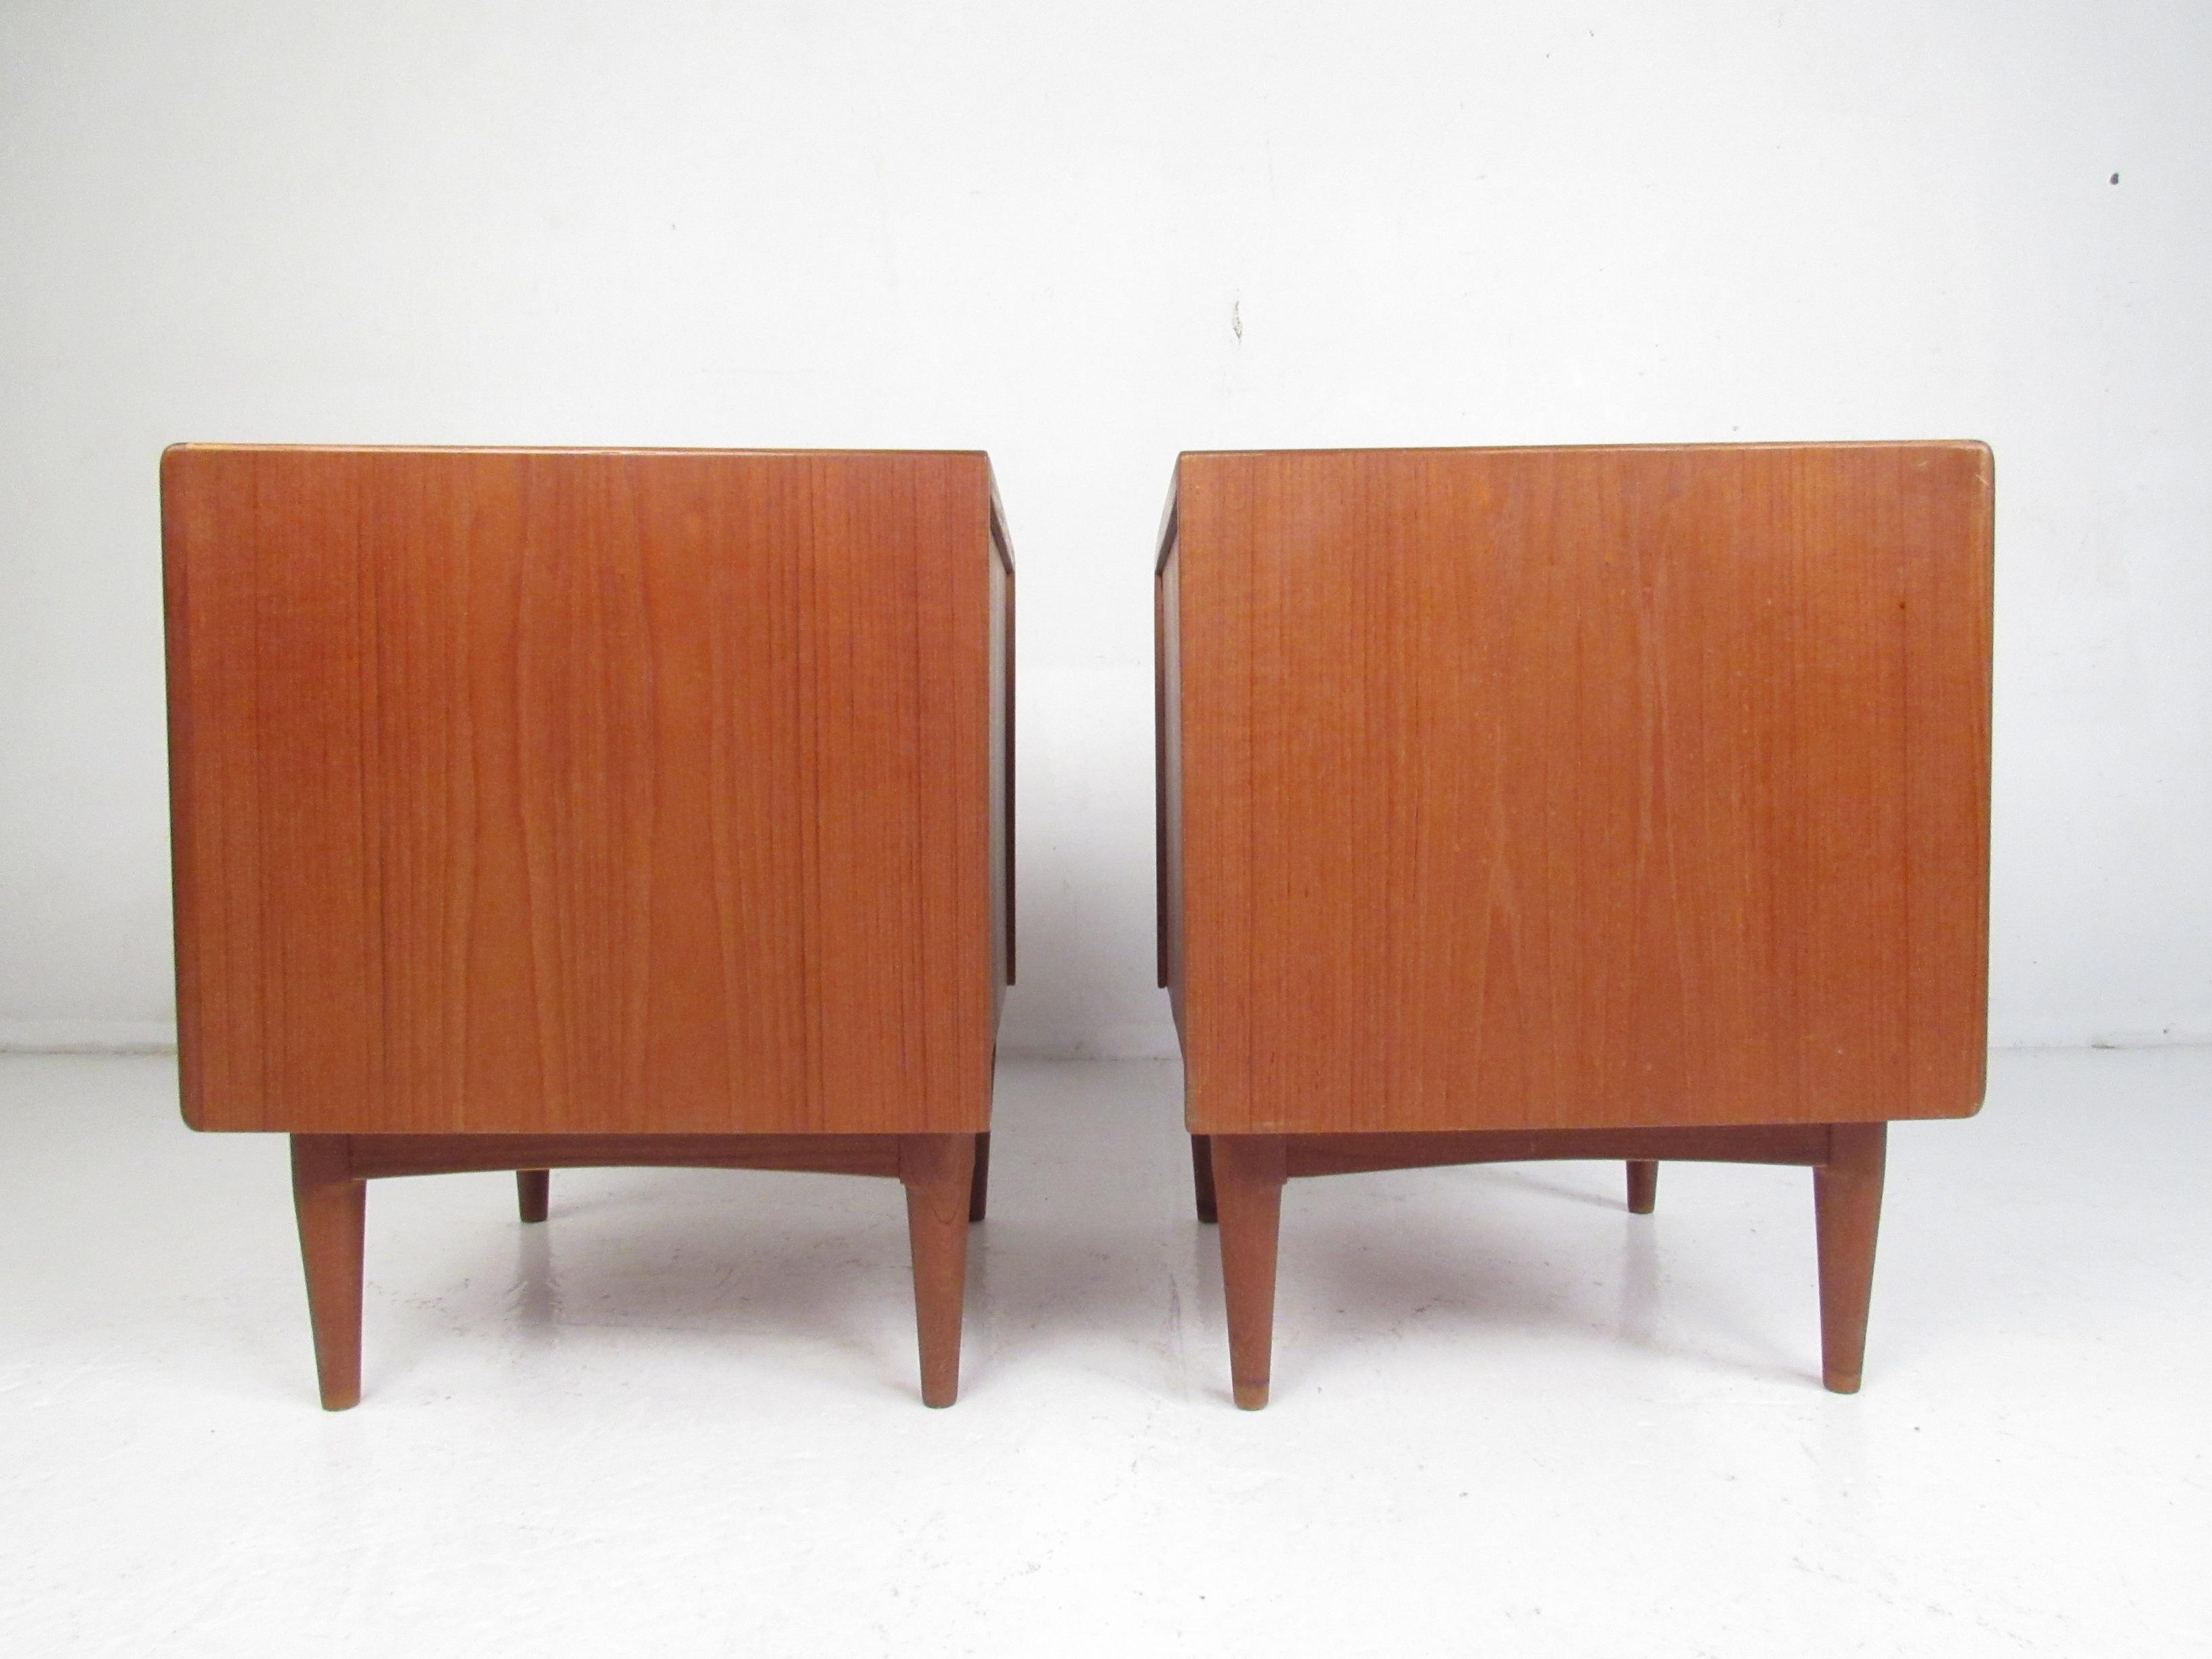 This stunning pair of Mid-Century Modern nightstands feature a large compartment with a drawer hidden by a tambour door. An unusual par of side tables with tambour doors that function vertically rather than horizontally. A sleek design with